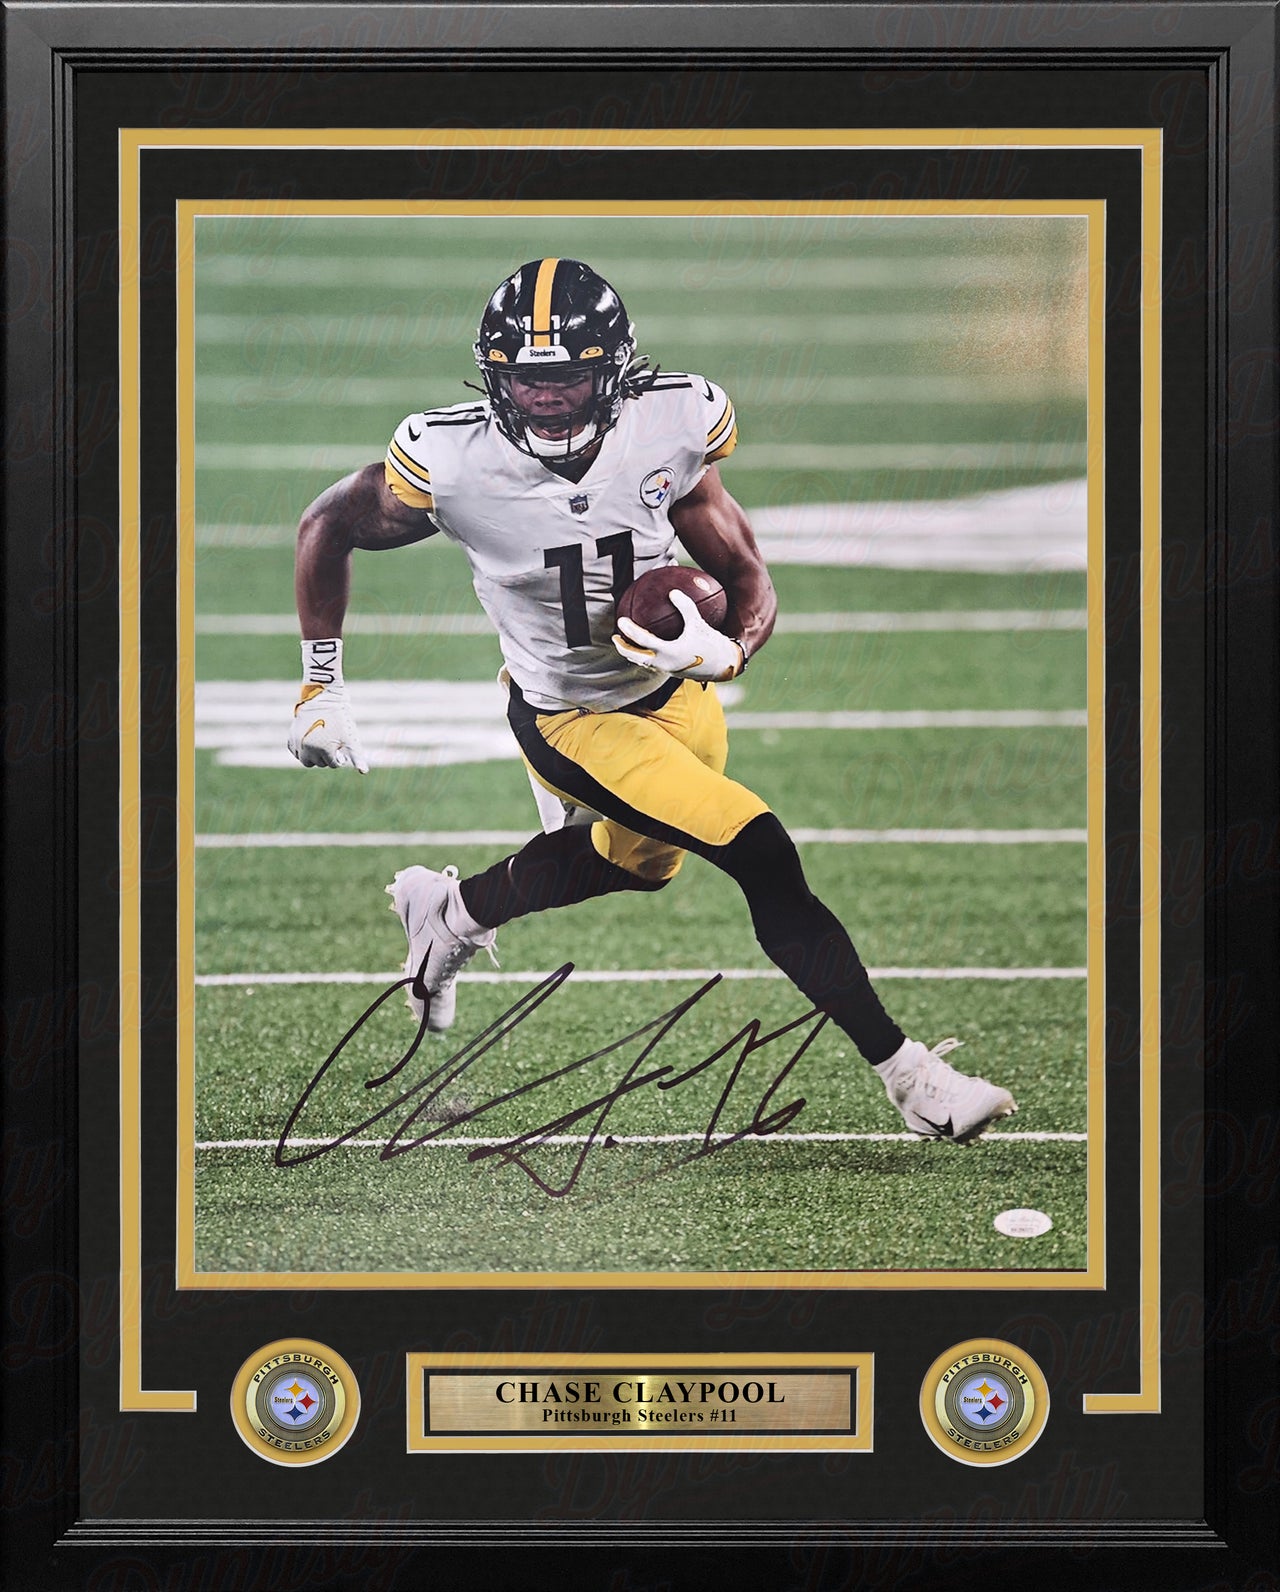 Chase Claypool Running Action Pittsburgh Steelers Autographed 16" x 20" Framed Football Photo - Dynasty Sports & Framing 